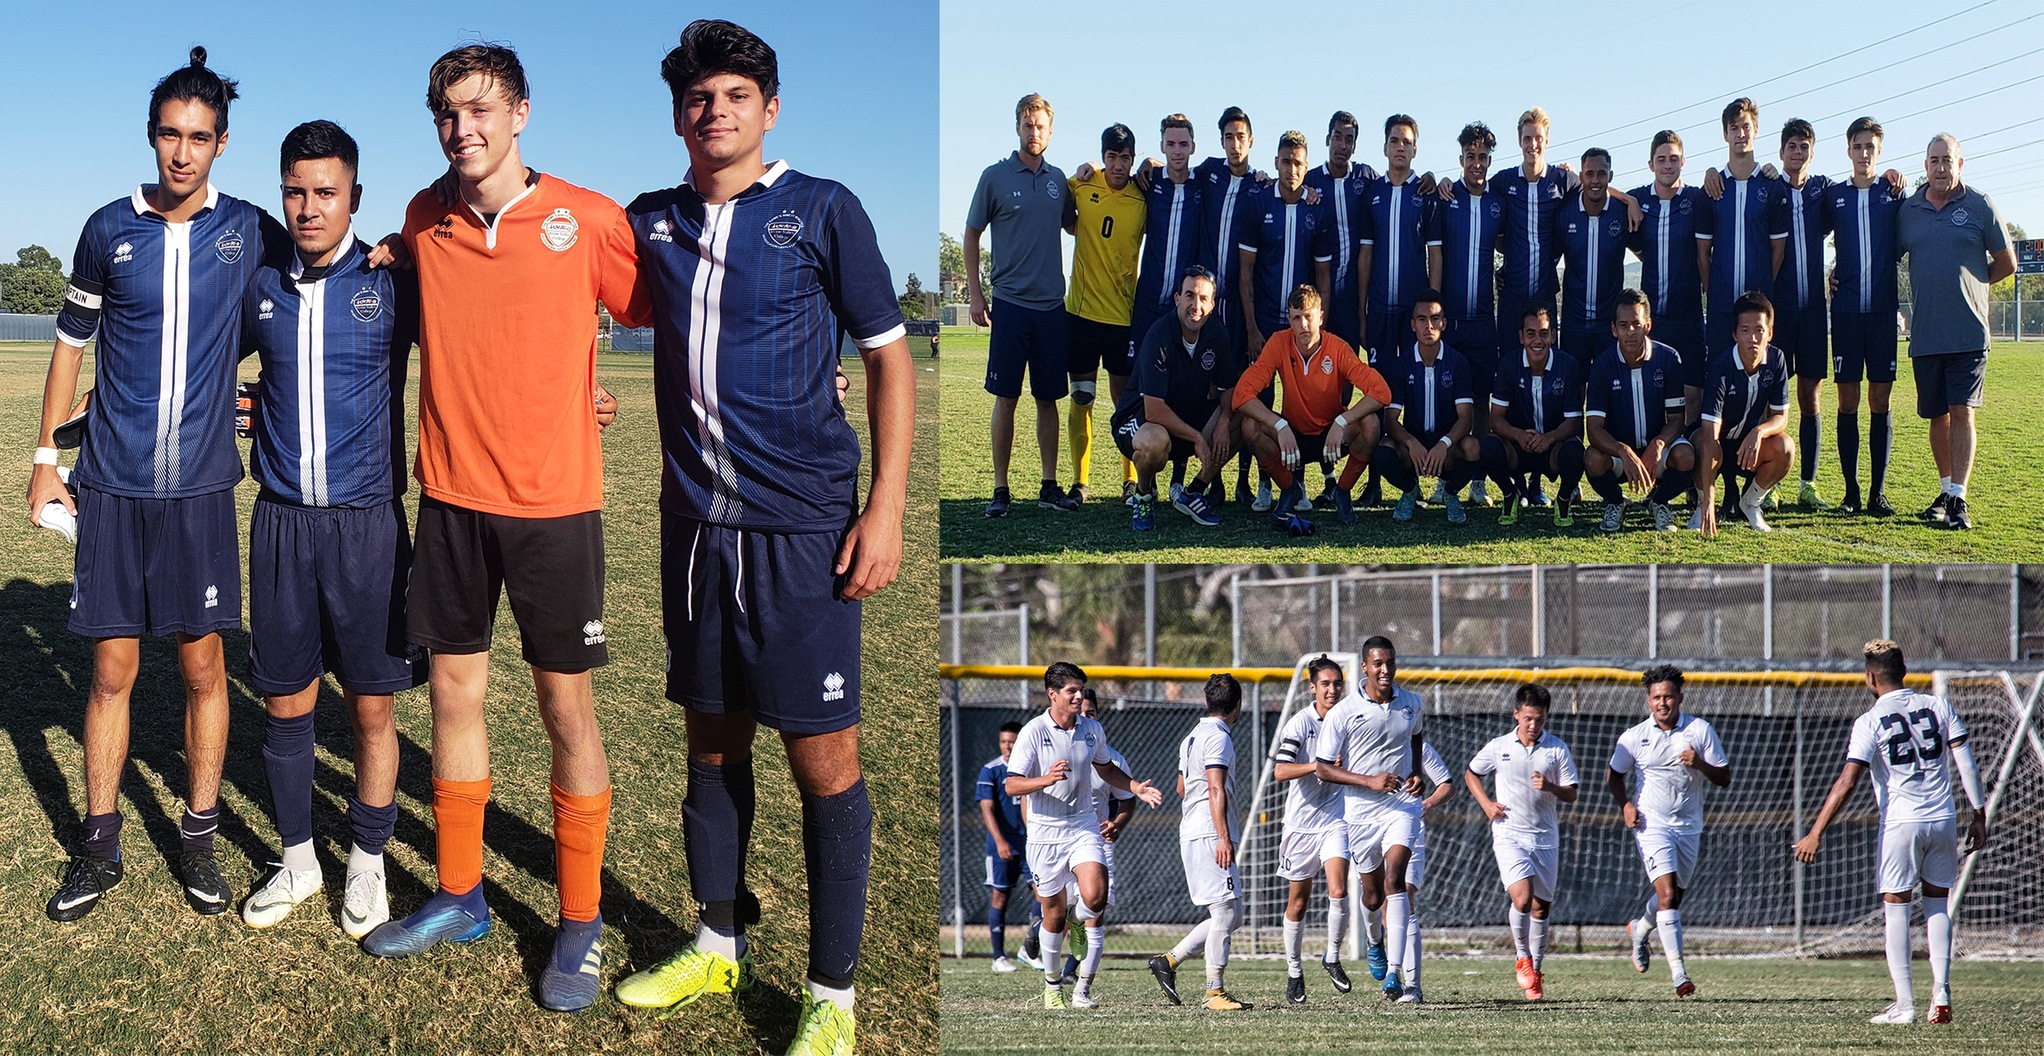 Honorable Mention Story - Men's soccer team makes playoff run